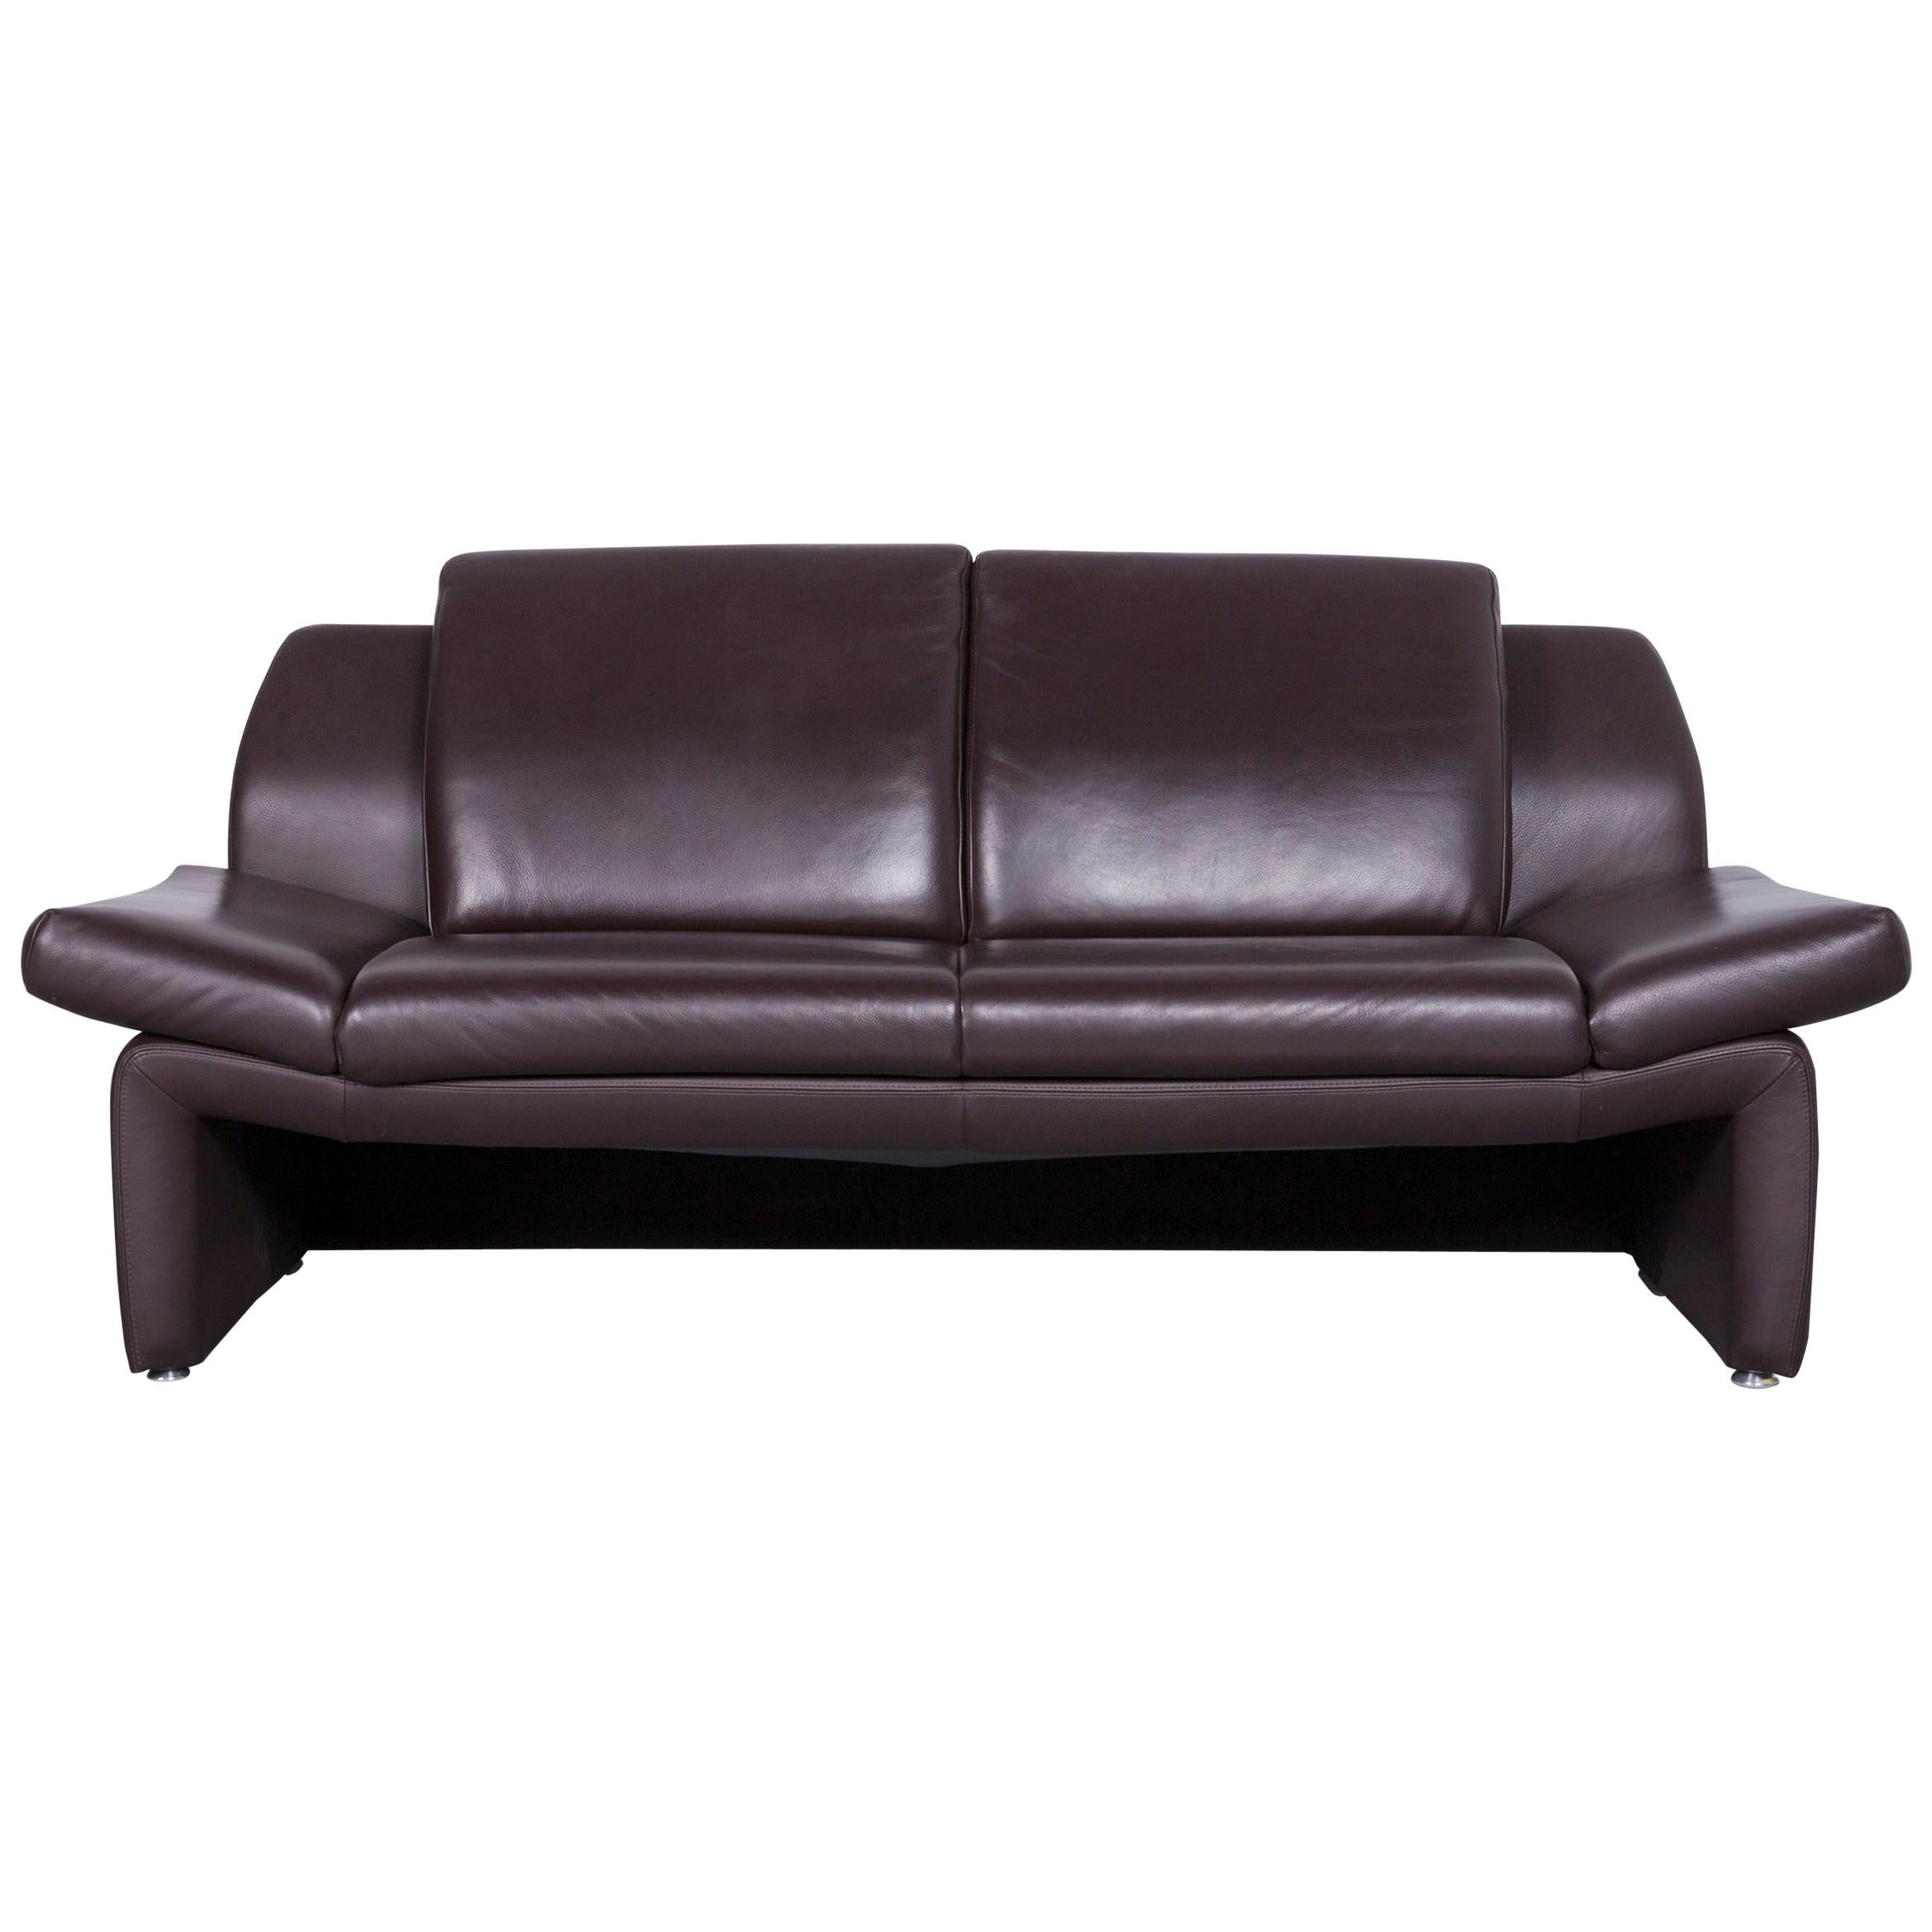 Laauser Designer Leather Sofa Brown Two-Seat Couch For Sale